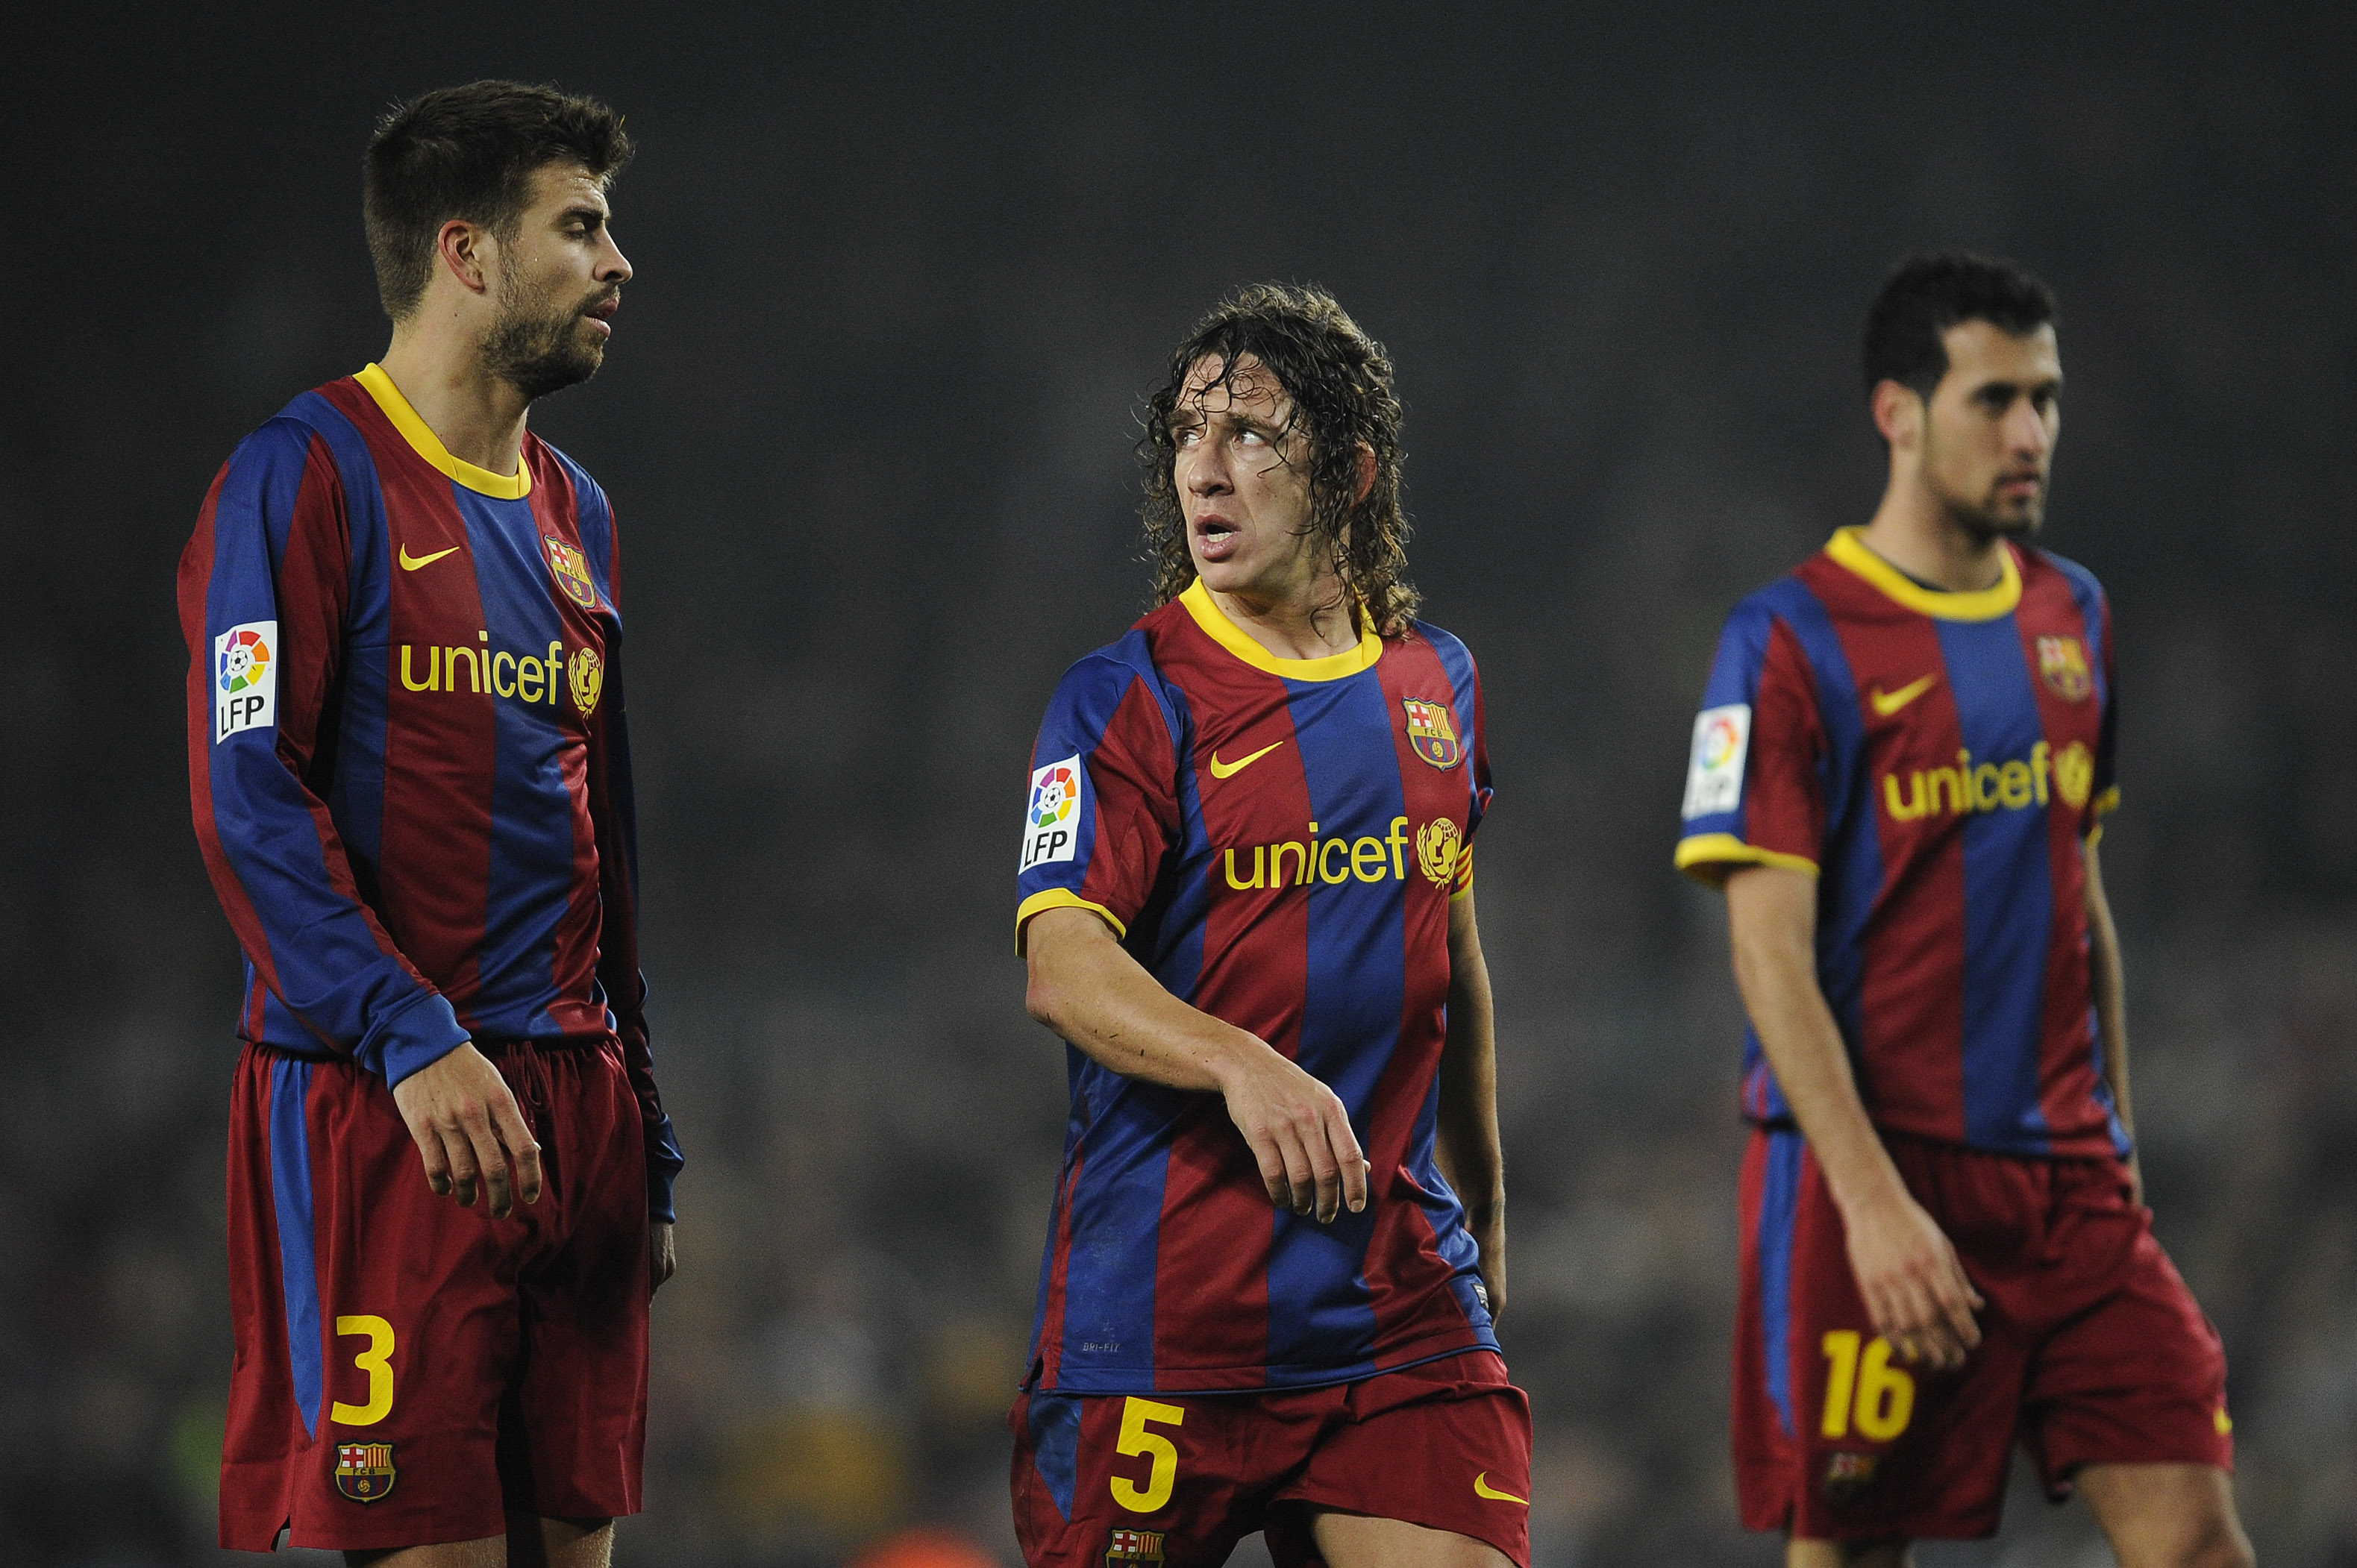 BARCELONA, SPAIN - JANUARY 16:  Gerard Pique (L), Carles Puyol (C) and Sergio Busquets of FC Barcelona look on during the La Liga match between FC Barcelona and Malaga at Nou Camp on January 16, 2011 in Barcelona, Spain. Barcelona won 4-1.  (Photo by Davi